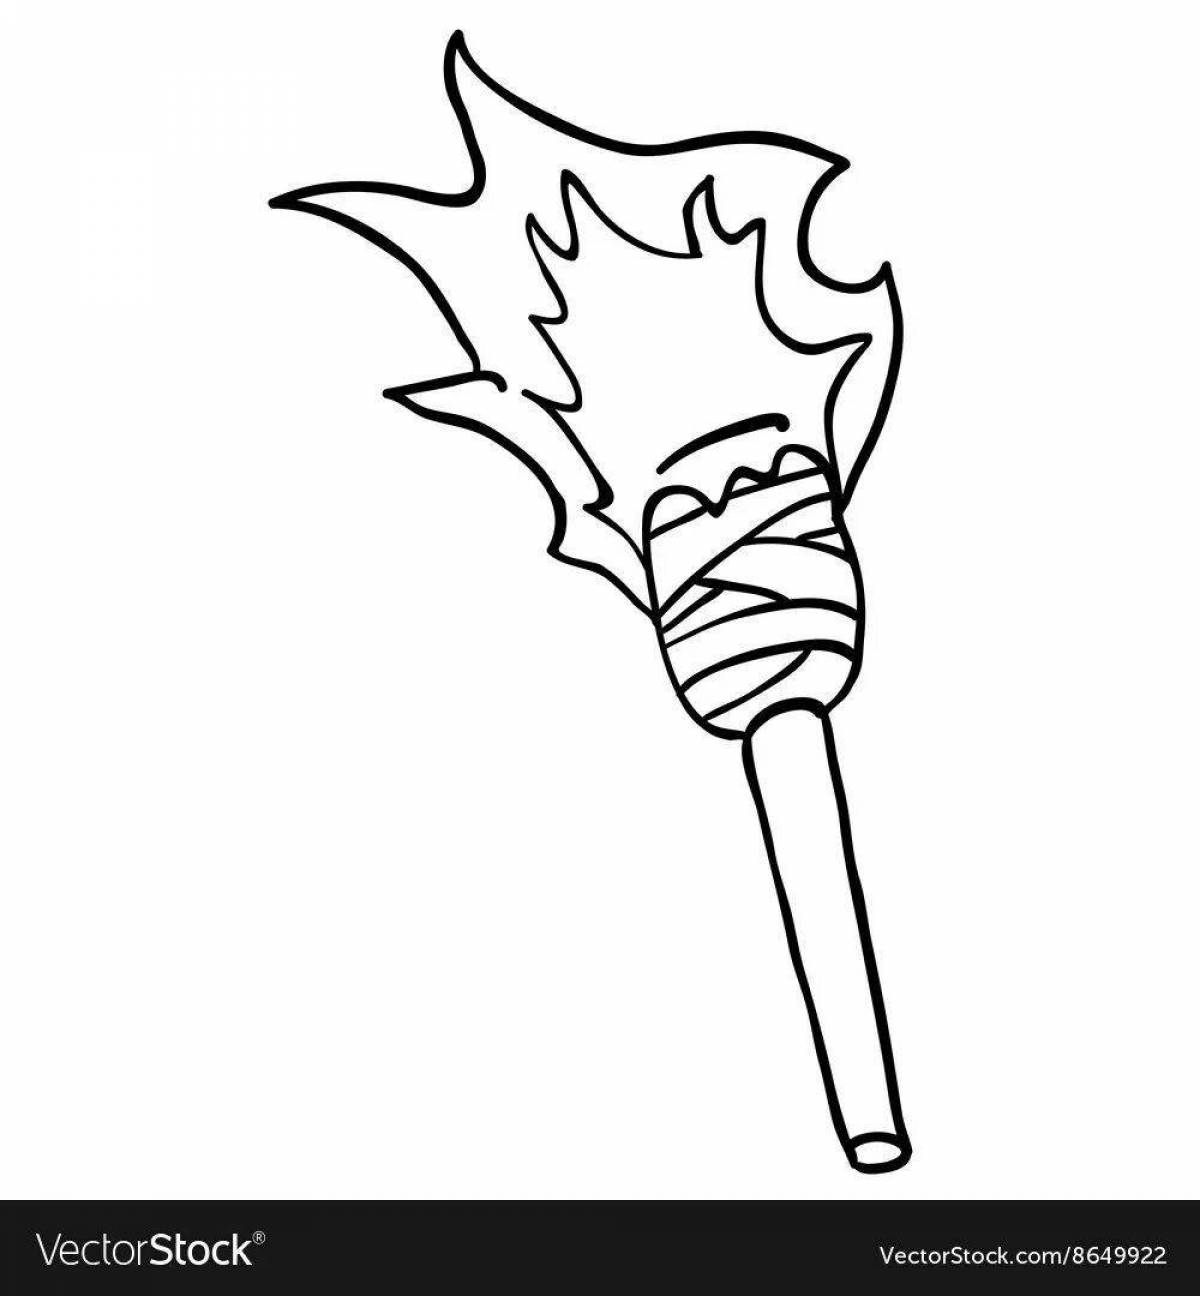 Fun torch coloring book for kids